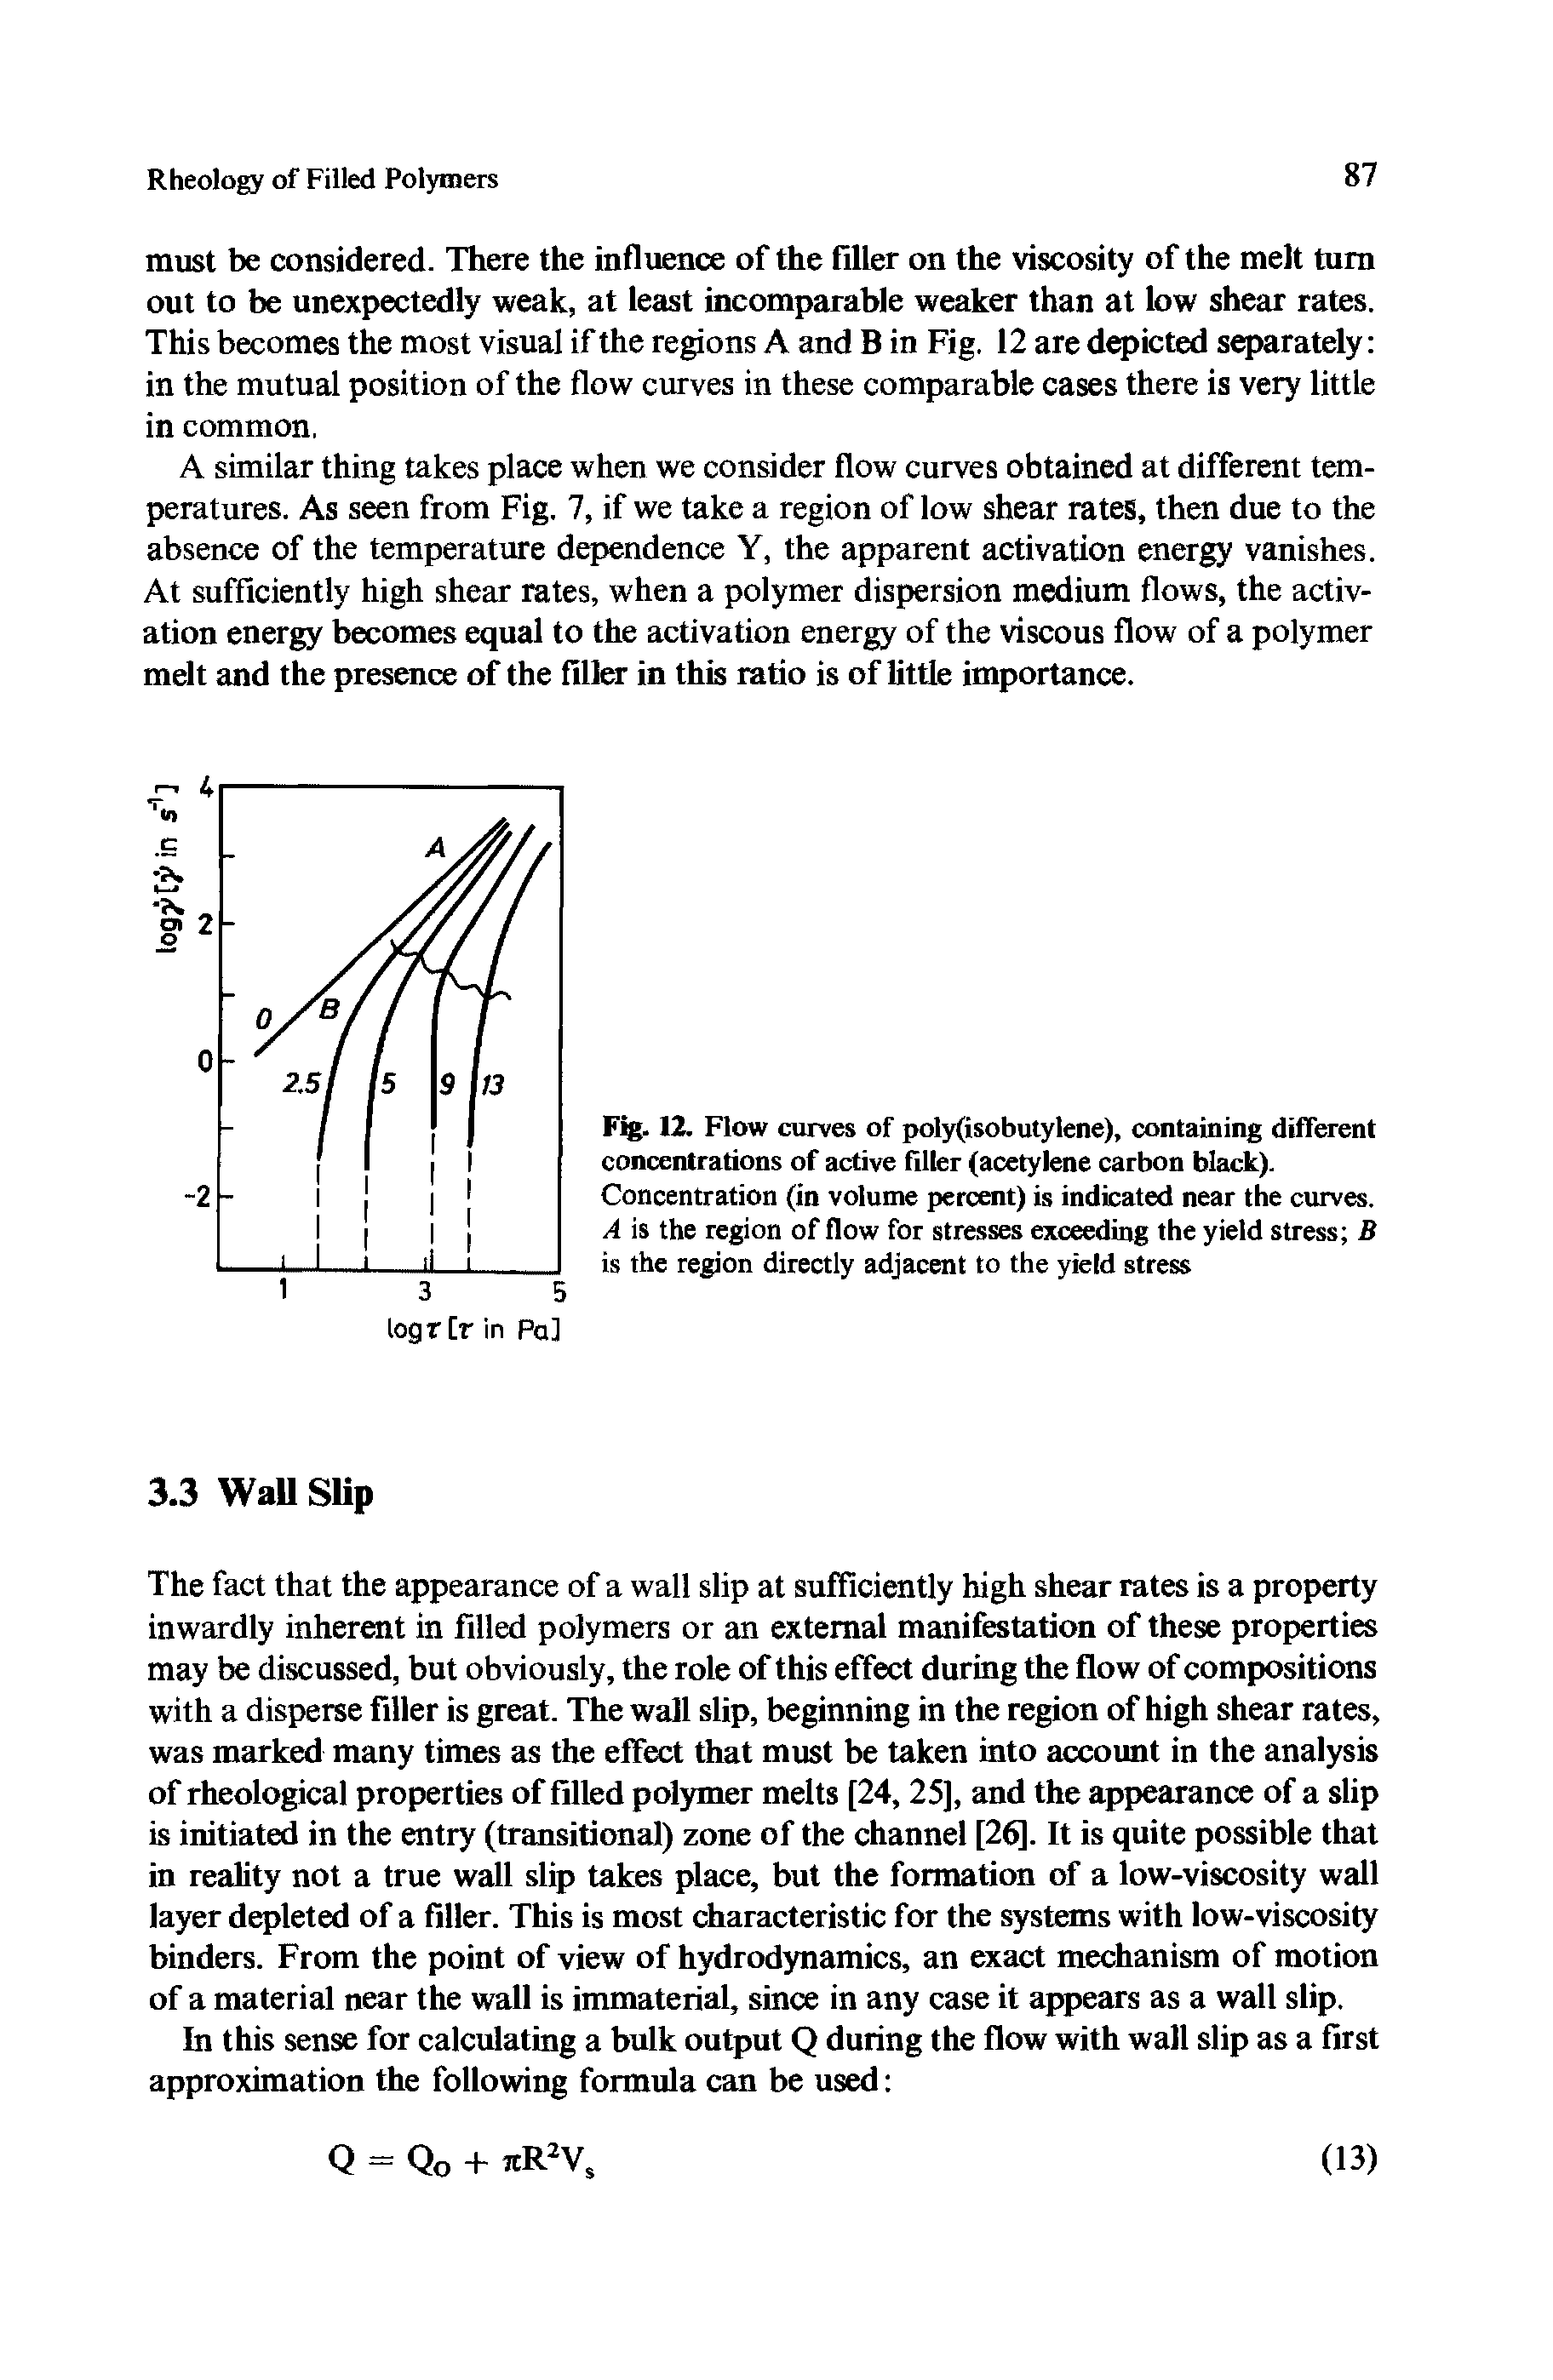 Fig. 12. Flow curves of poly(isobutylene), containing different concentrations of active filler (acetylene carbon black). Concentration (in volume percent) is indicated near the curves. A is the region of flow for stresses exceeding the yield stress B is the region directly adjacent to the yield stress...